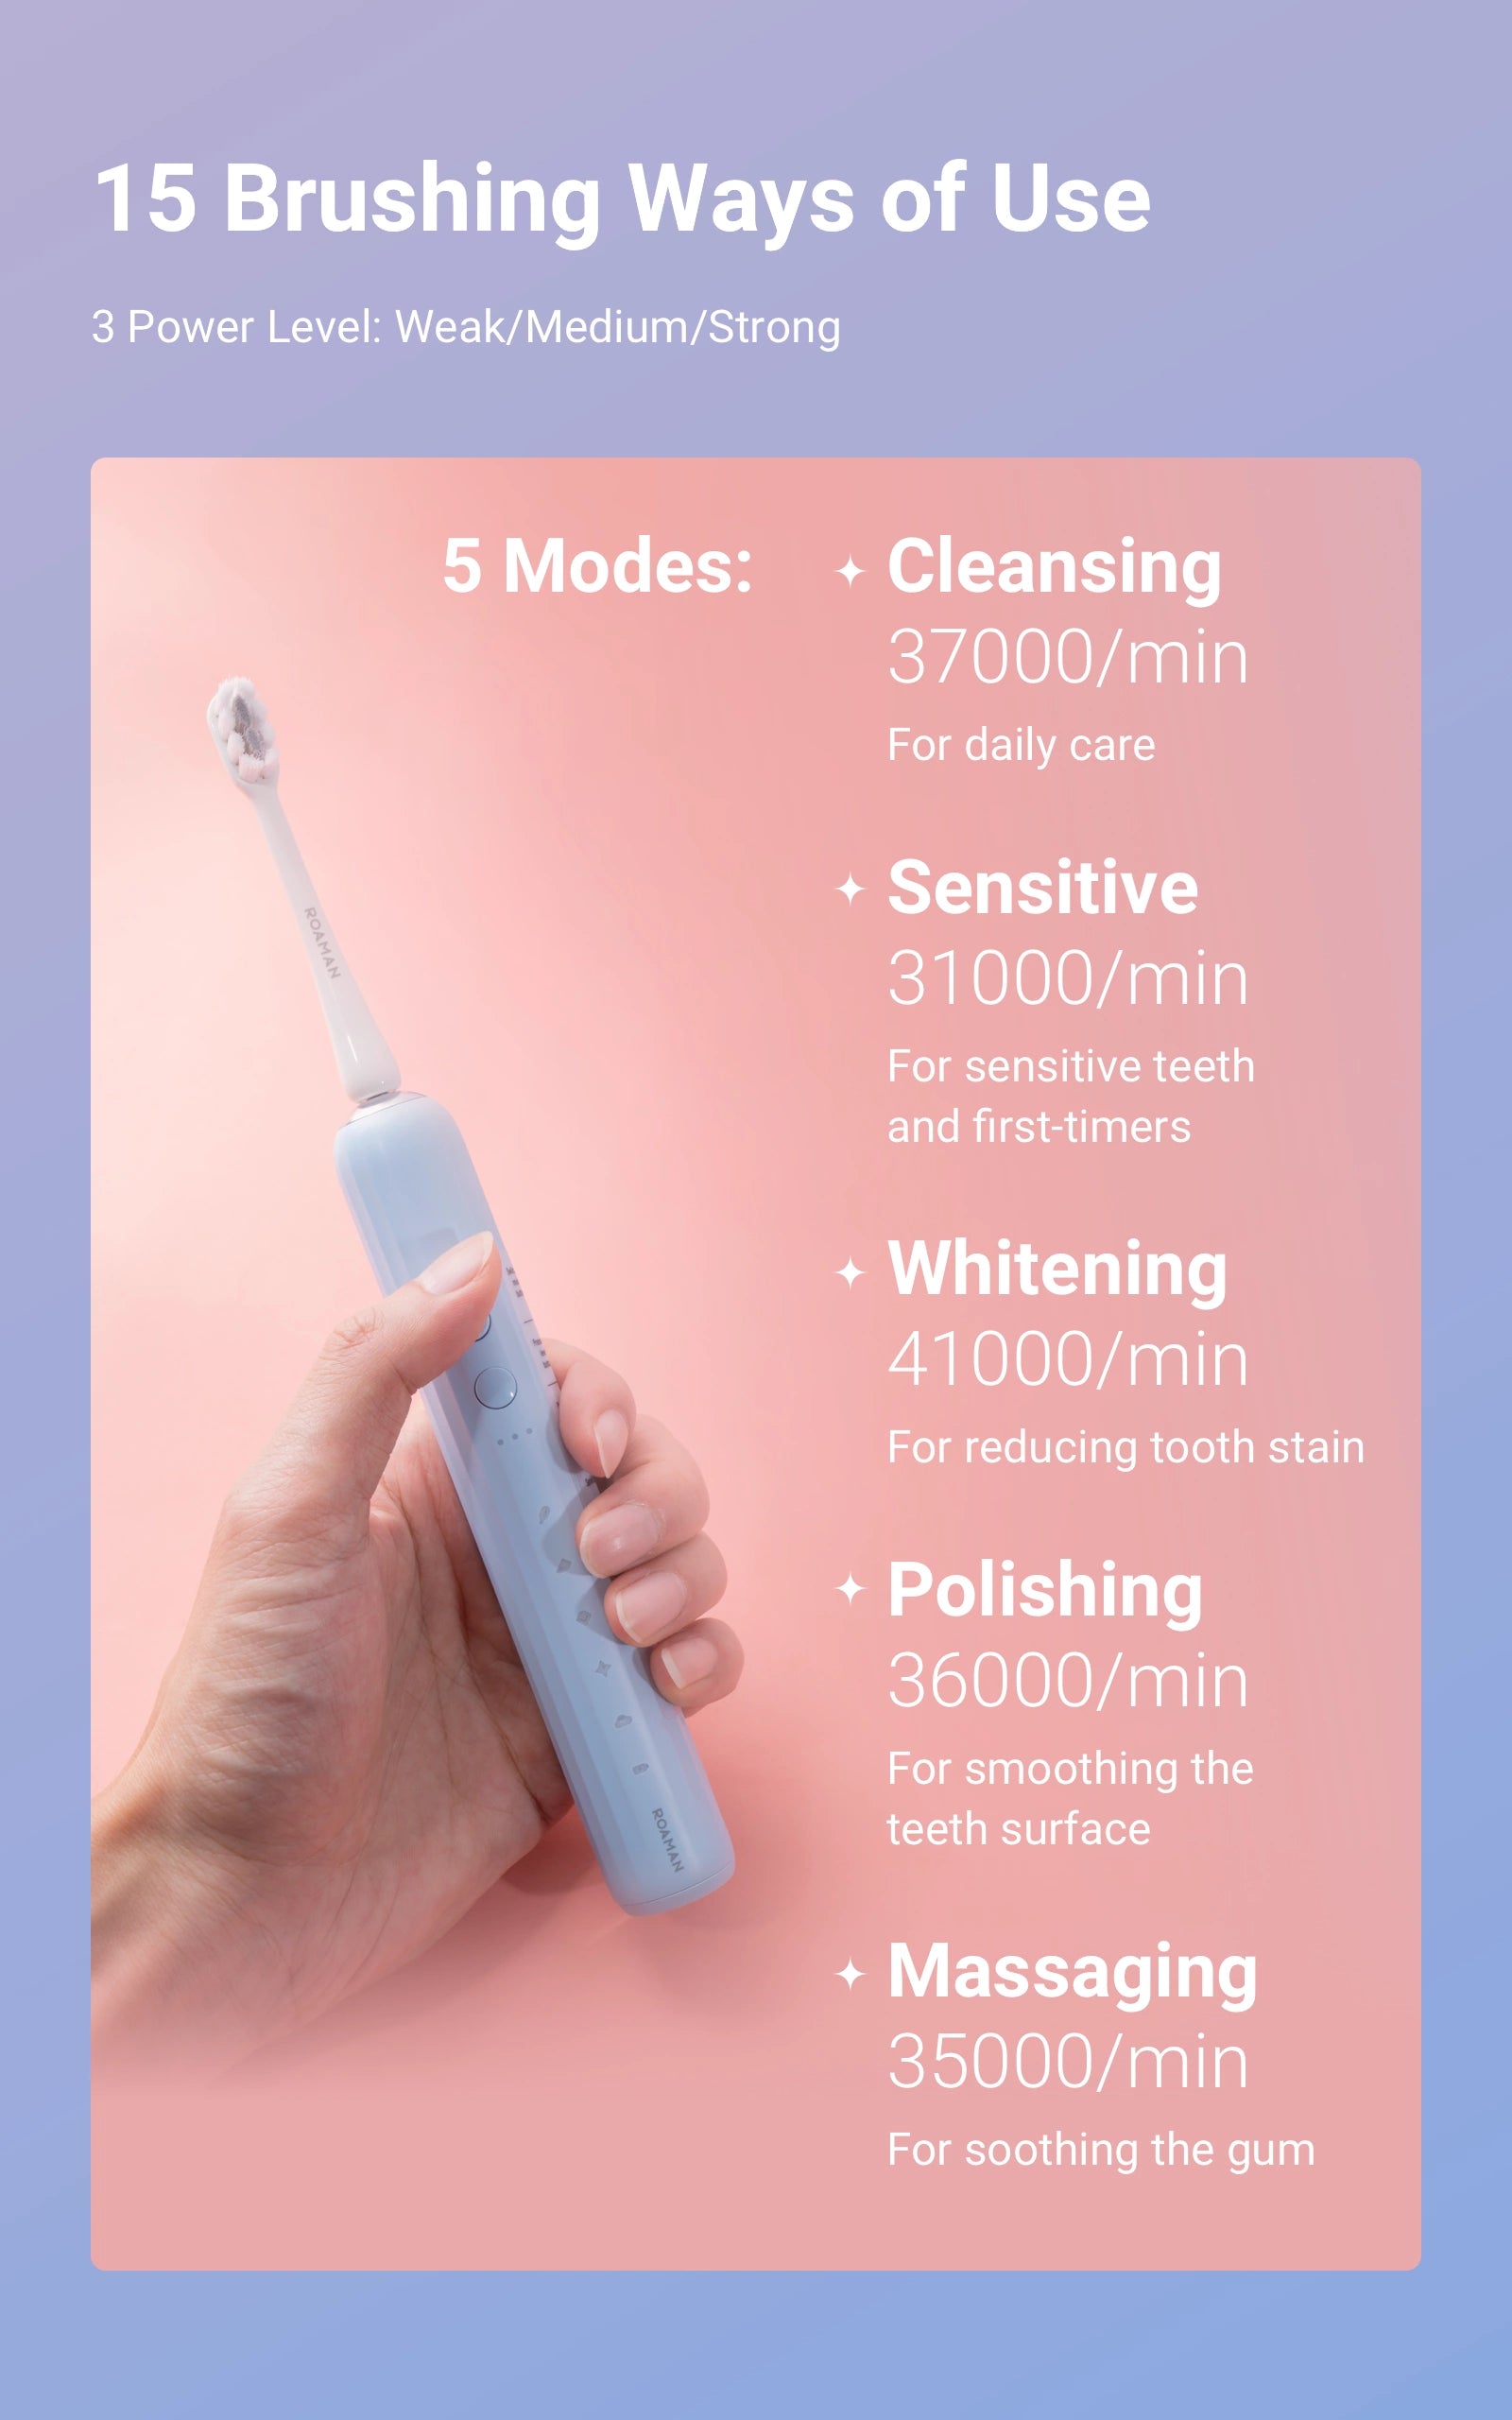 3 Power Level: Weak/Medium/Strong 5 Modes: - Sensitive 31000/min   For sensitive teeth and first-timers - Cleansing 37000/min   For daily care - Whitening 41000/min   For reducing tooth stain  - Polishing 36000/min   For smoothing the teeth surface - Massaging 35000/min   For soothing the gingiva